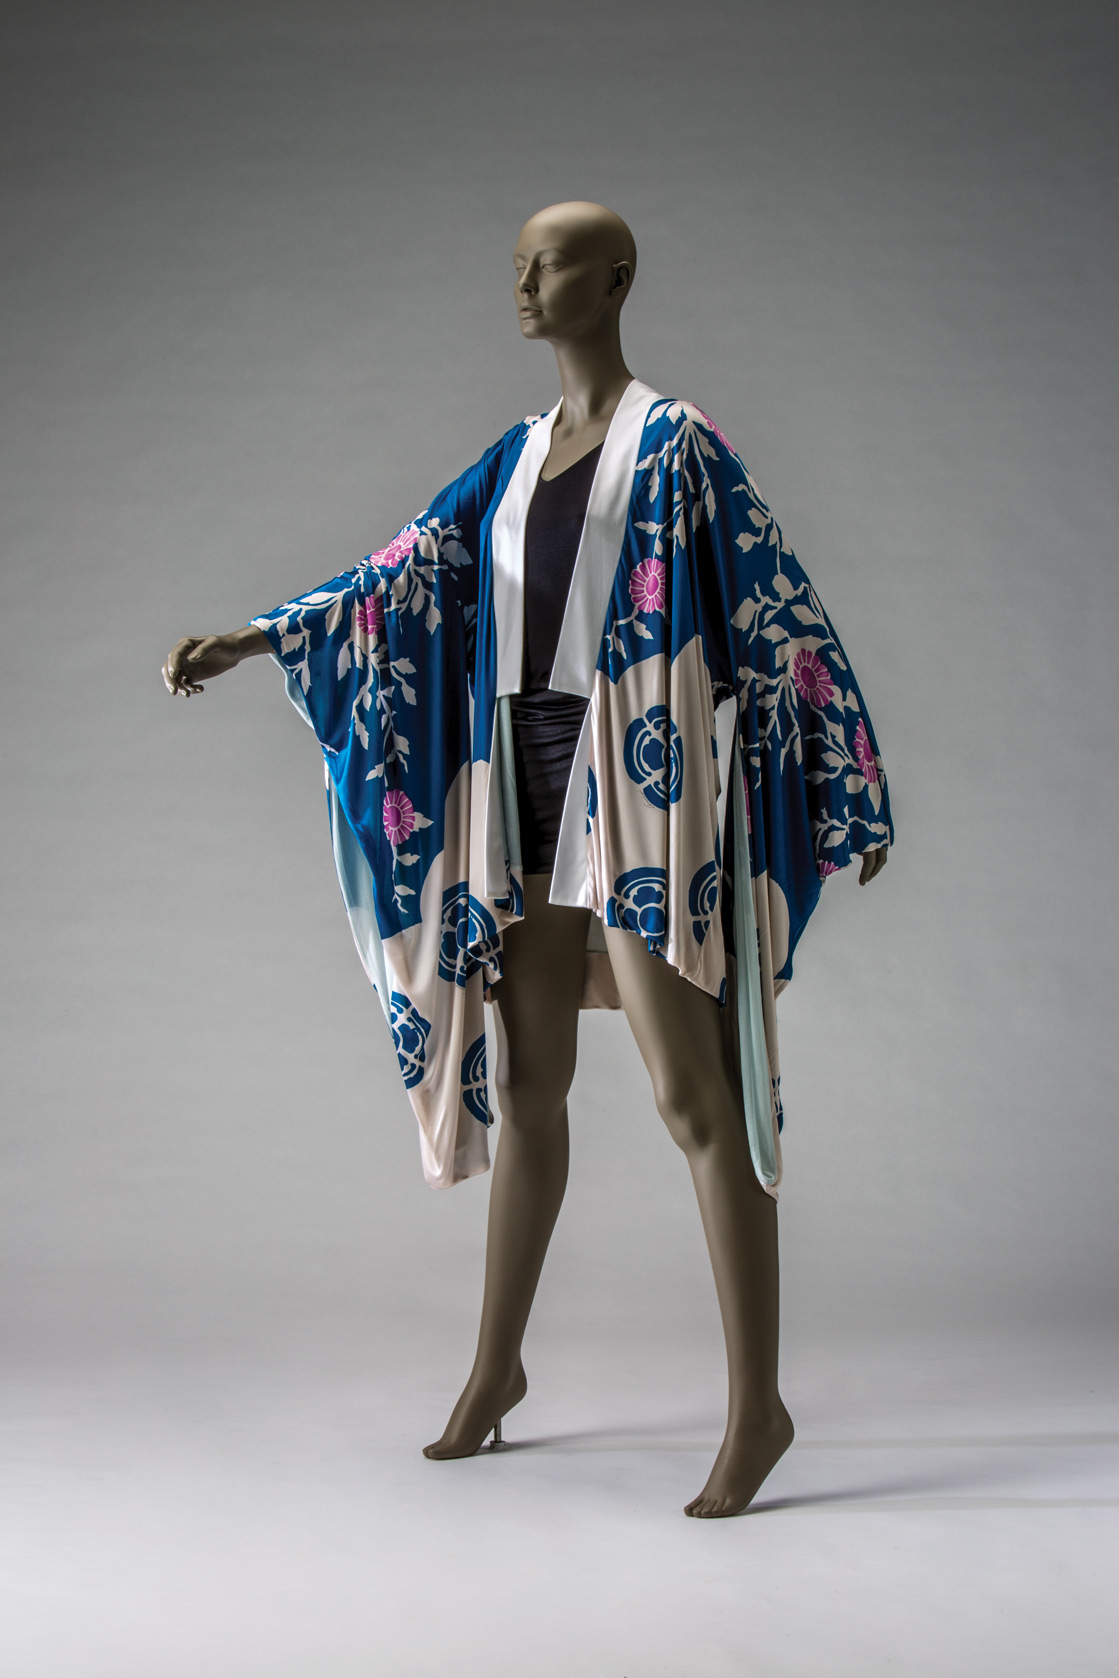 Jacket, Spring/Summer 2003, by Tom Ford (American, b. 1961) for Gucci. Rayon tricot with printing; silk tricot lining. Collection of The Kyoto Costume Institute. © The Kyoto Costume Institute, photo by Takashi Hatakeyama.
